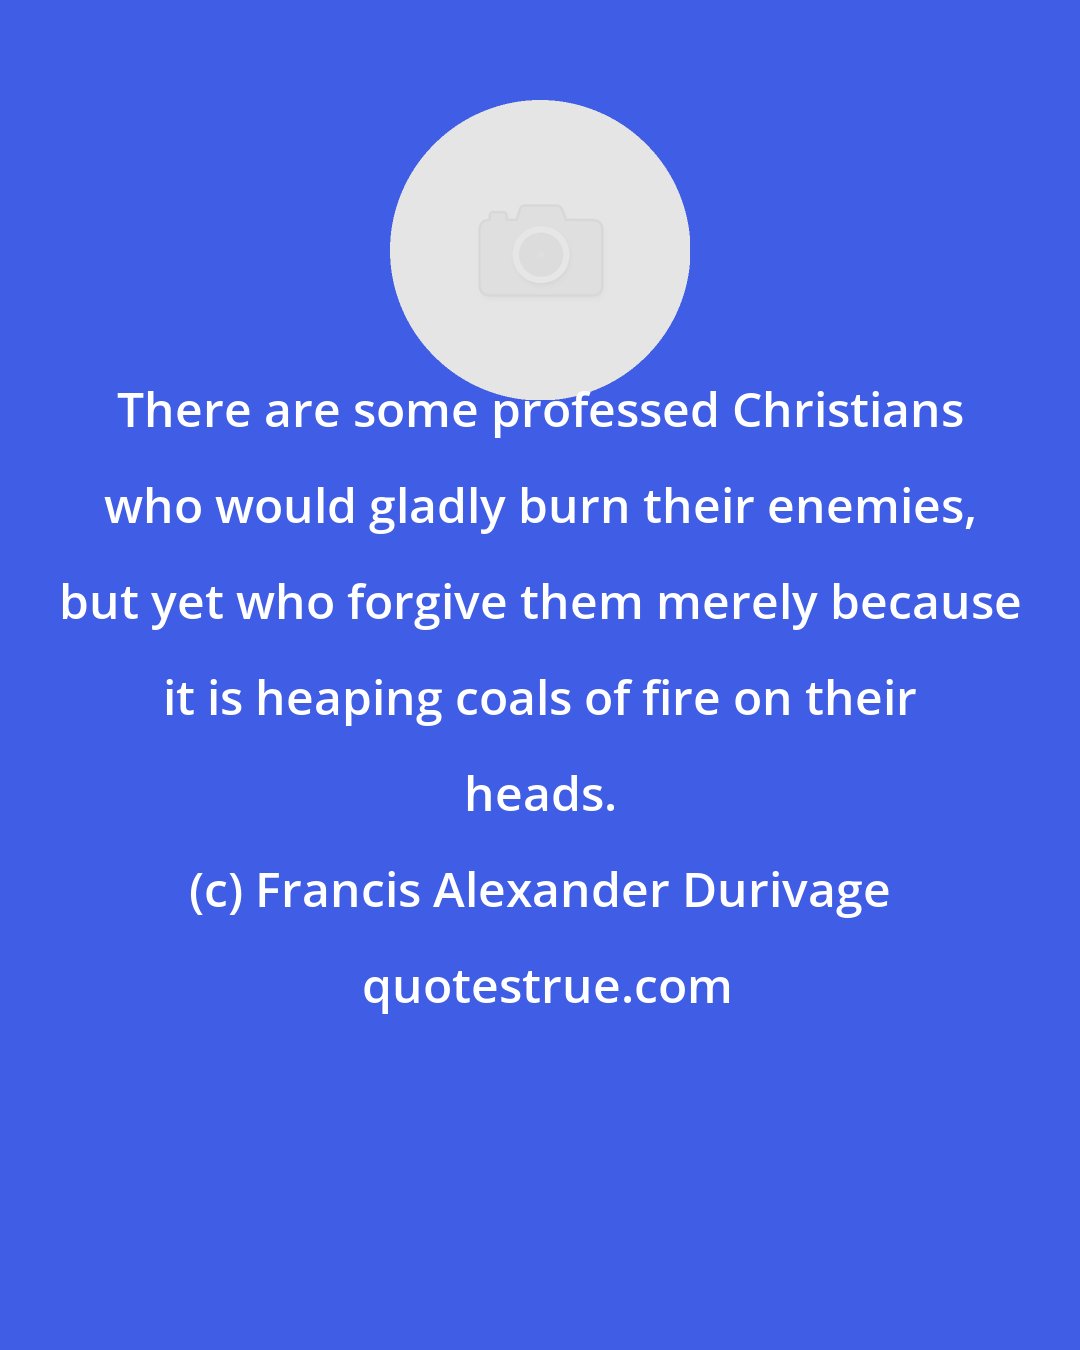 Francis Alexander Durivage: There are some professed Christians who would gladly burn their enemies, but yet who forgive them merely because it is heaping coals of fire on their heads.